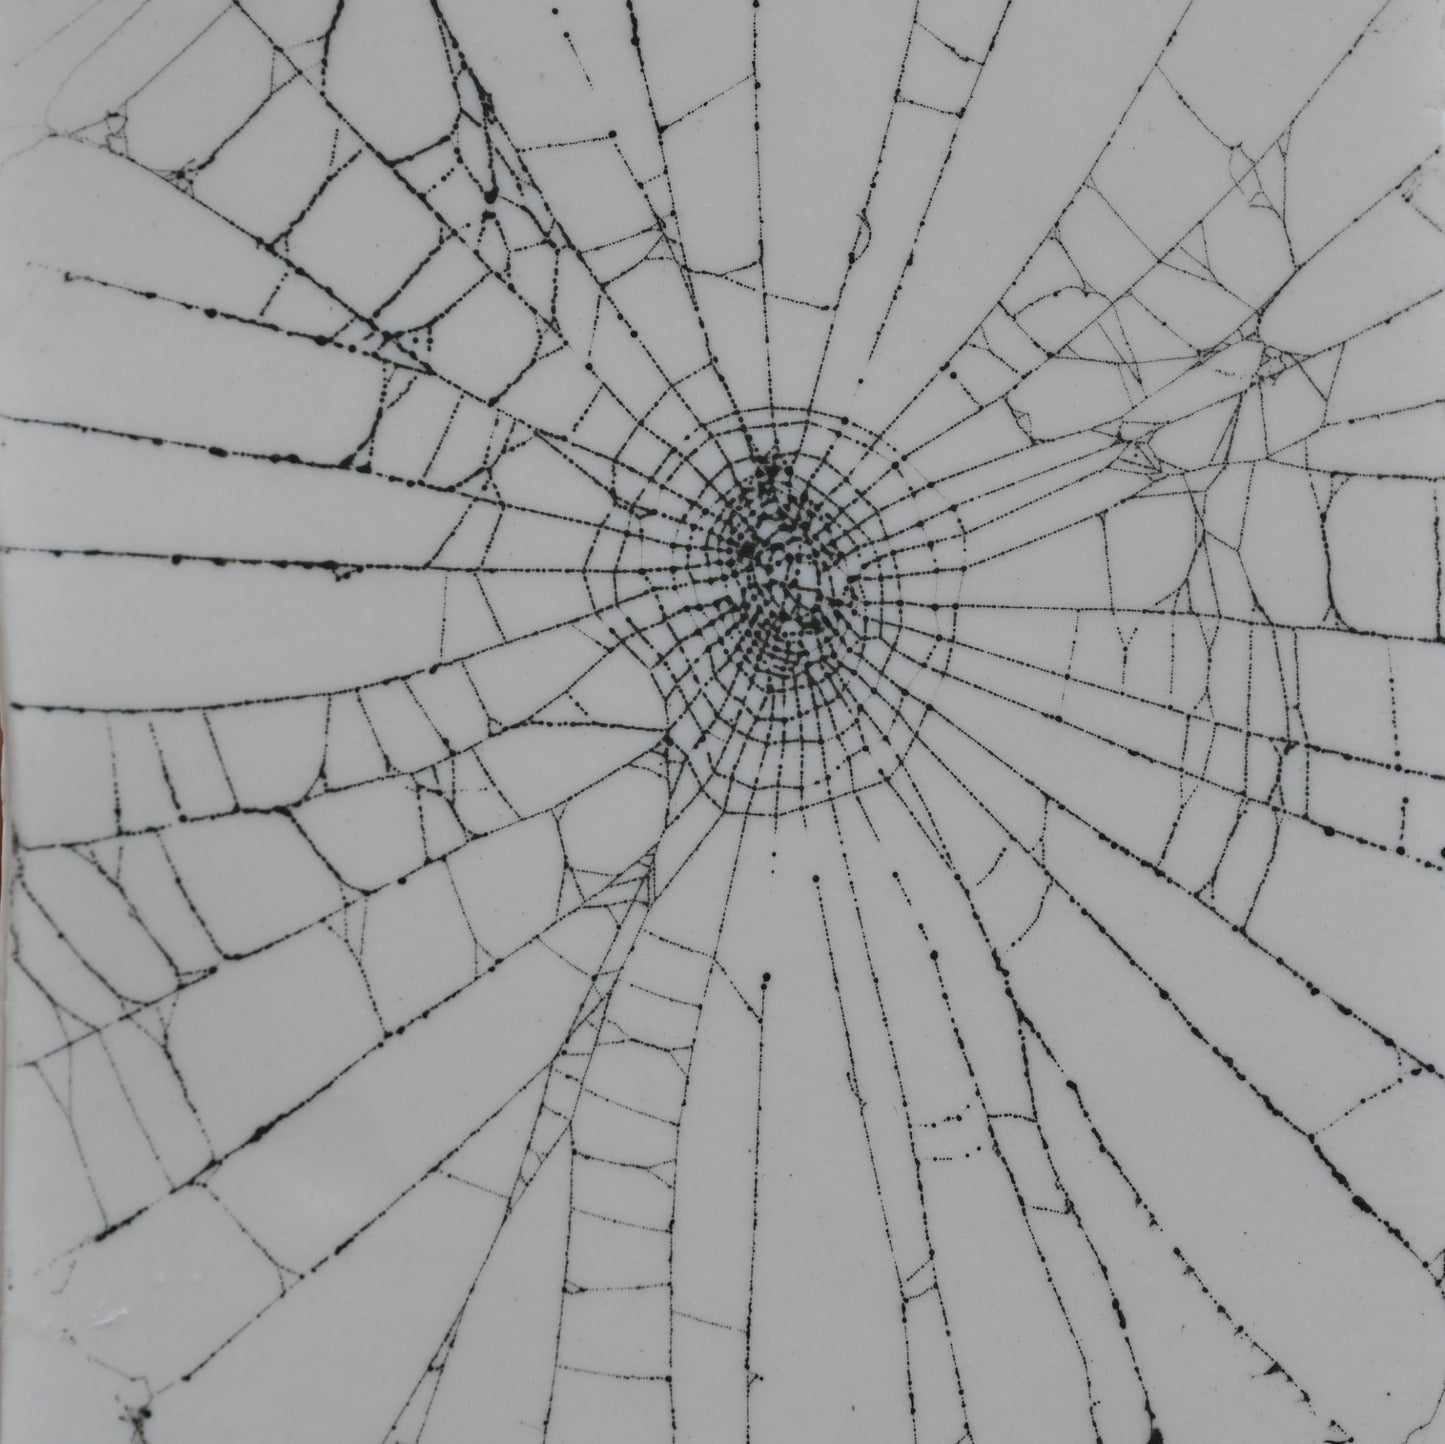 Web on Clay (132), Collected August 25, 2022